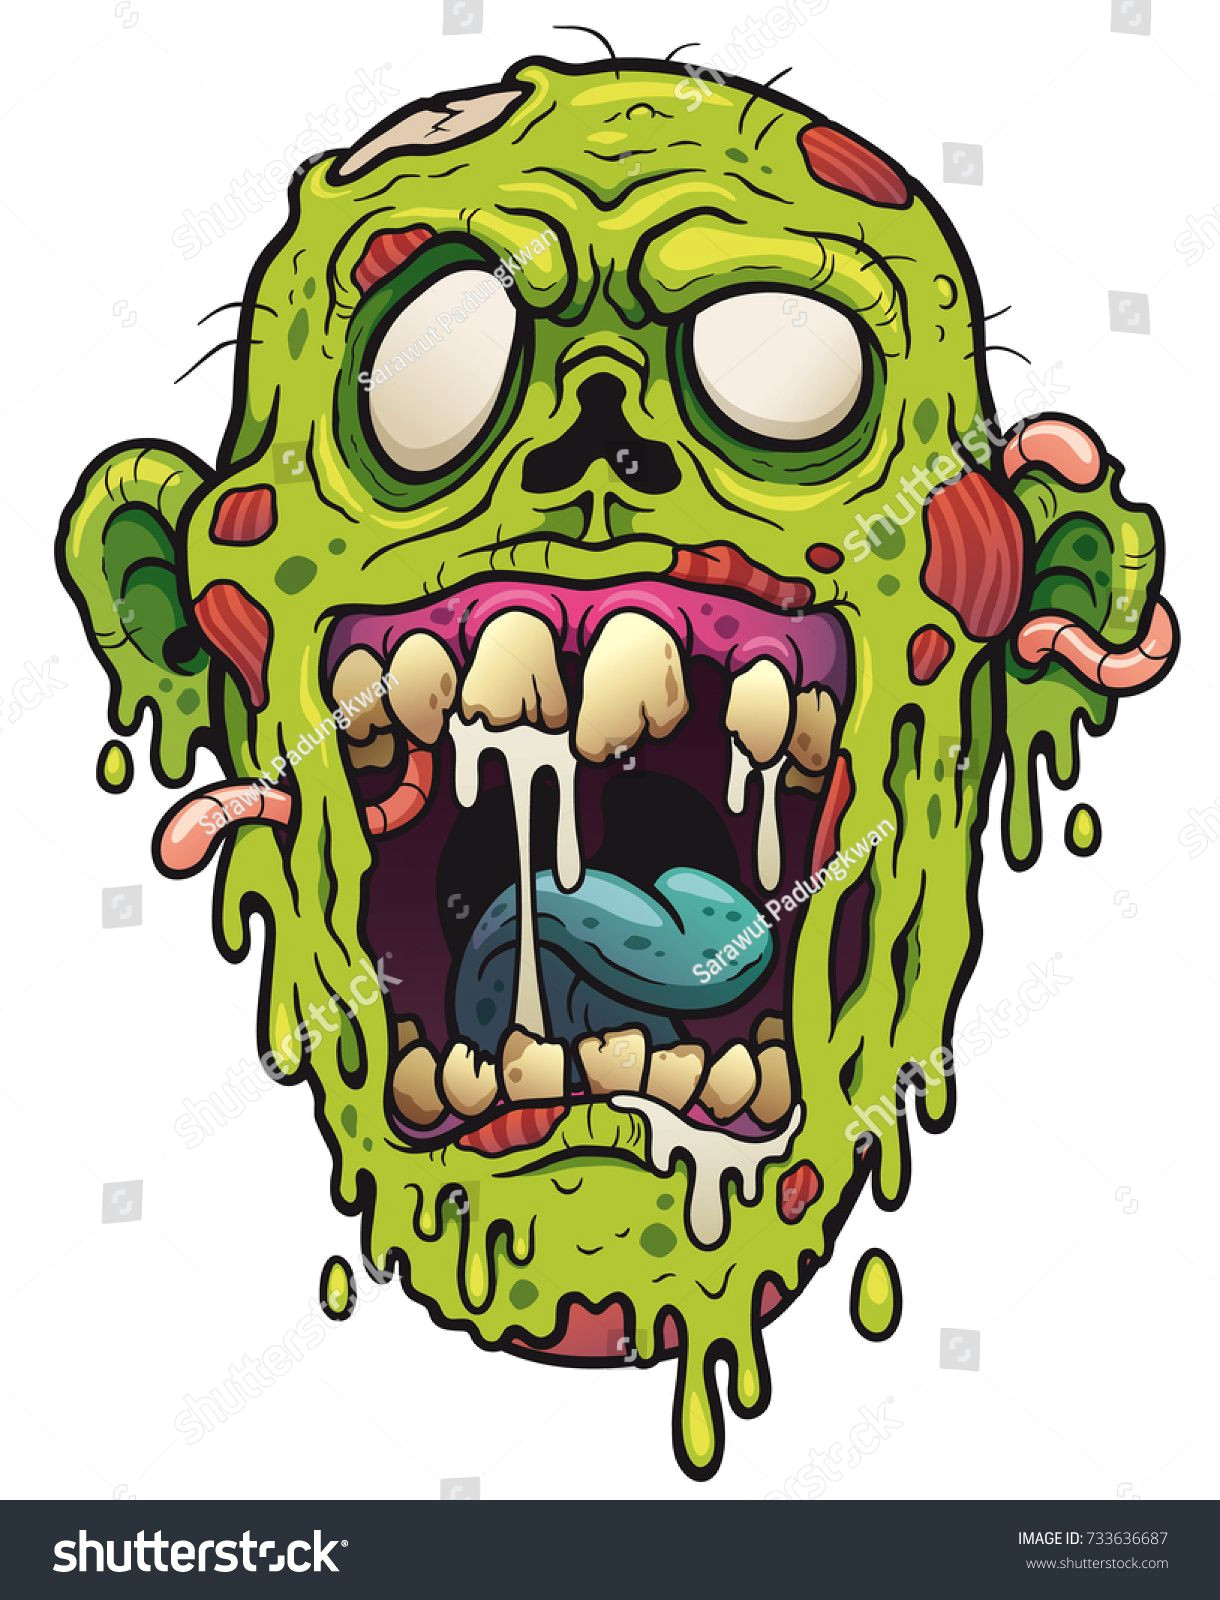 Easy Drawing Zombie Vector Illustration Of Cartoon Zombie Head Patrick B In 2019